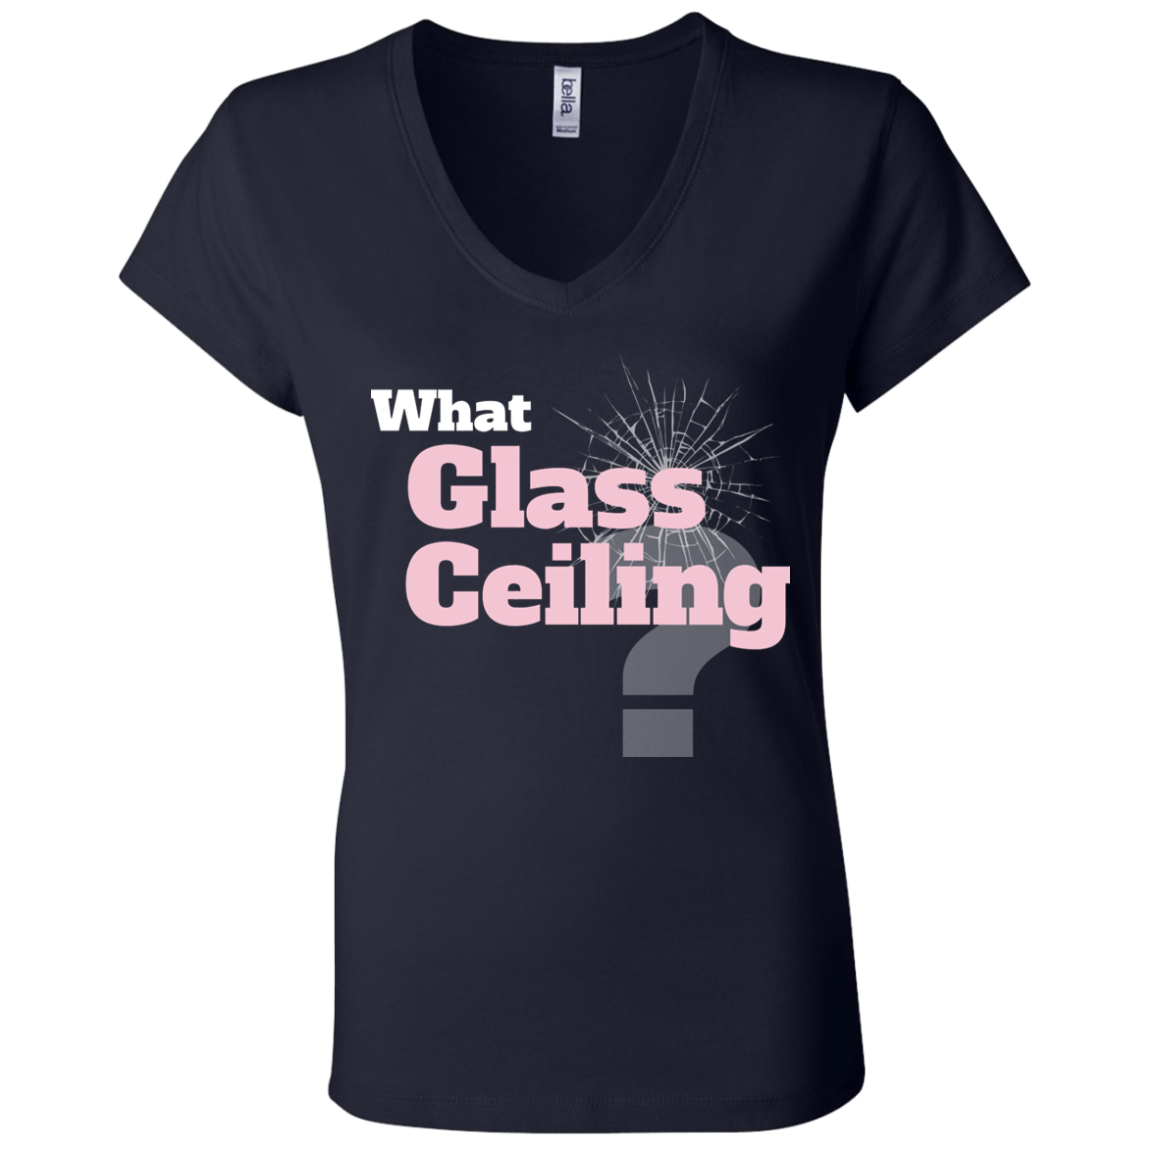 What Glass Ceiling?